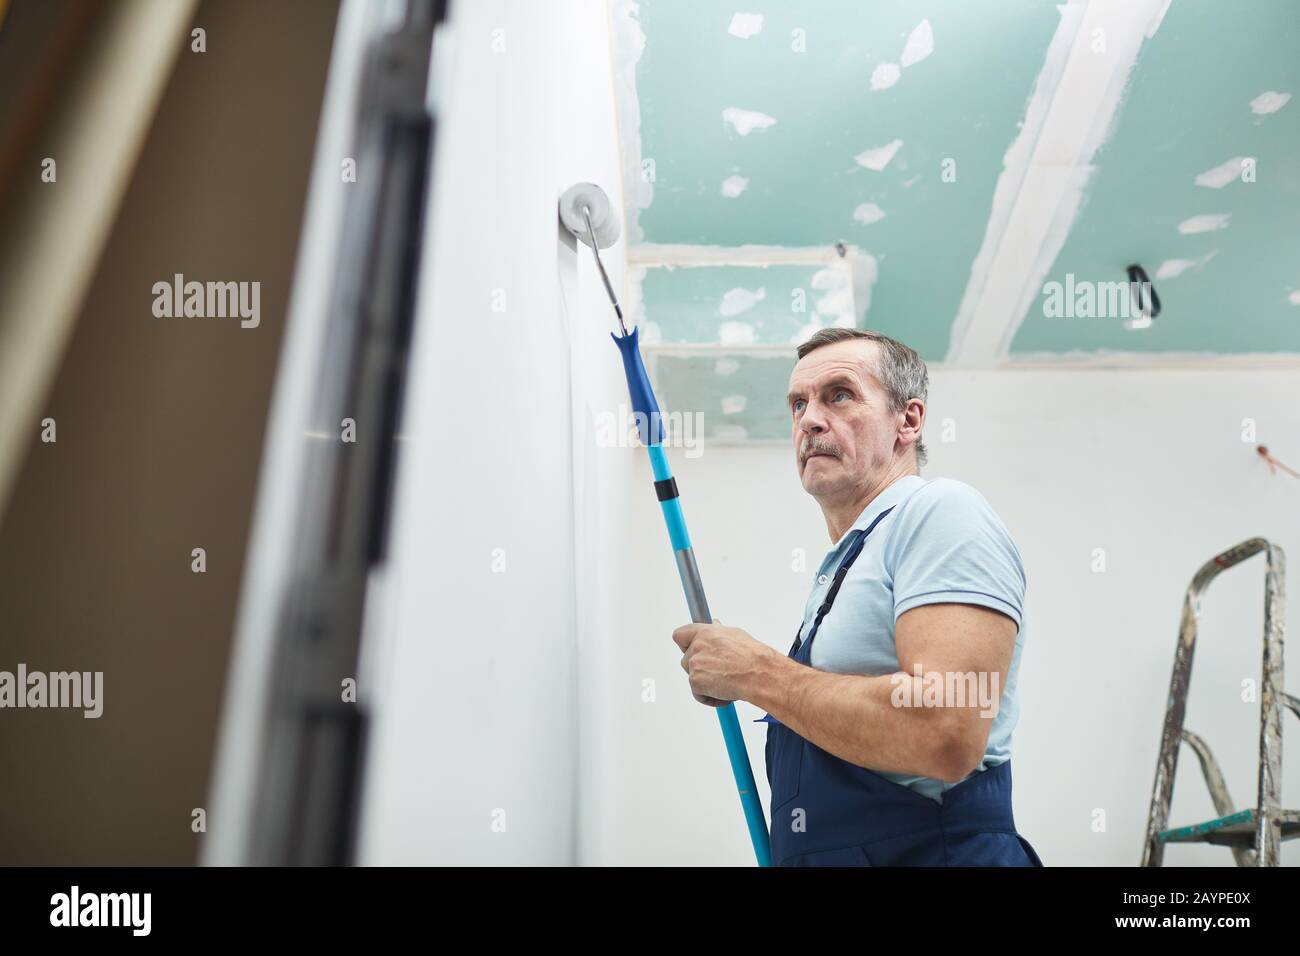 Low angle portrait of senior construction worker painting wall while renovating house, copy space Stock Photo